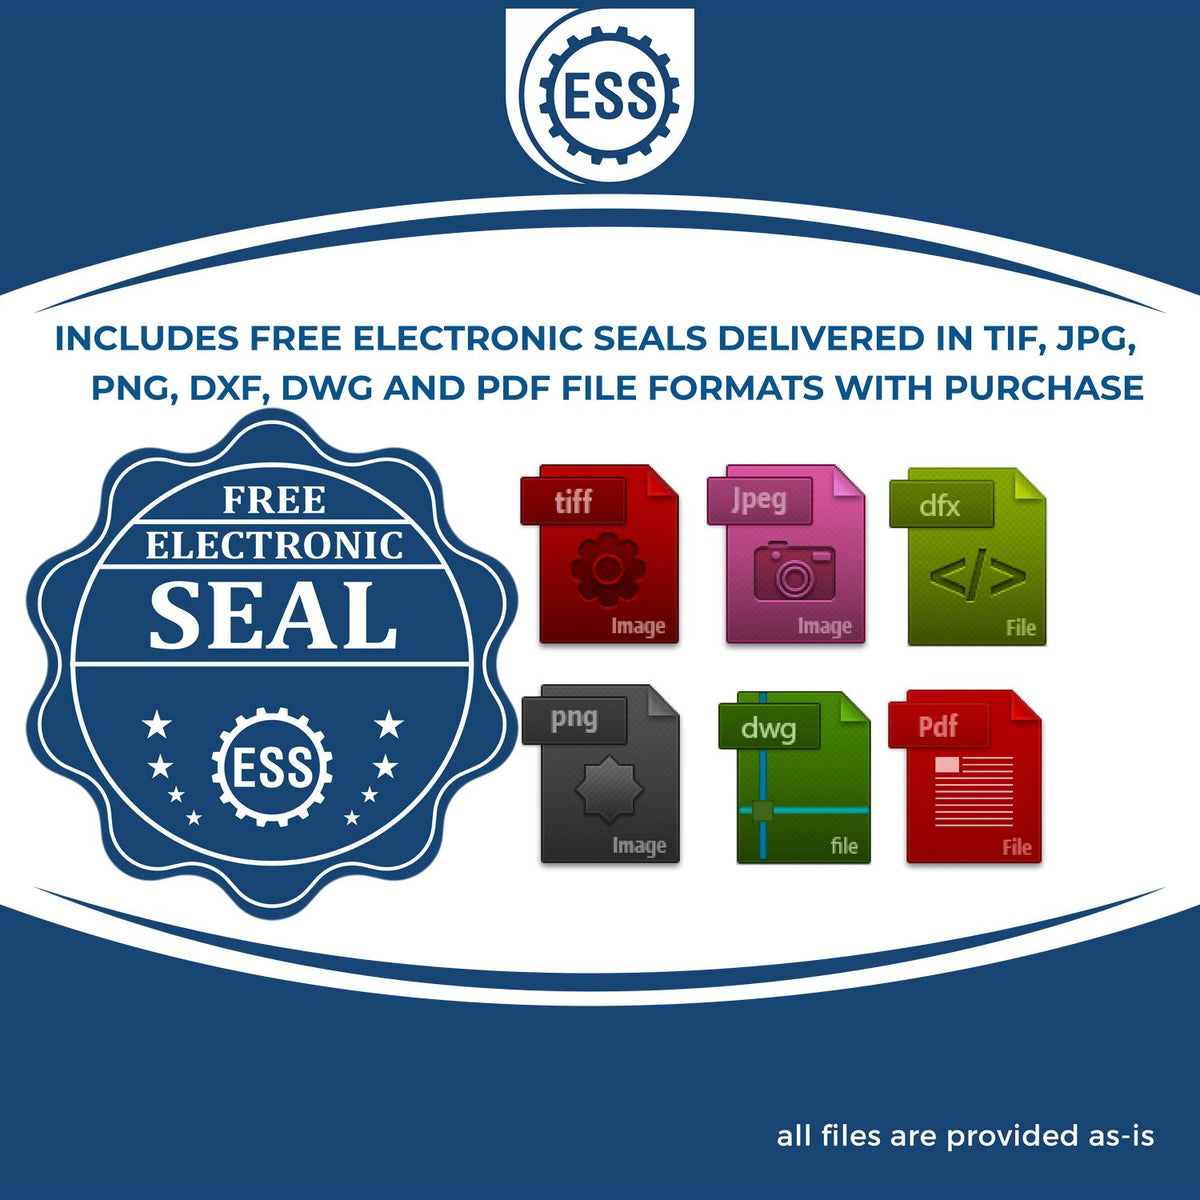 An infographic for the free electronic seal for the Ohio Professional Engineer Seal Stamp illustrating the different file type icons such as DXF, DWG, TIF, JPG and PNG.